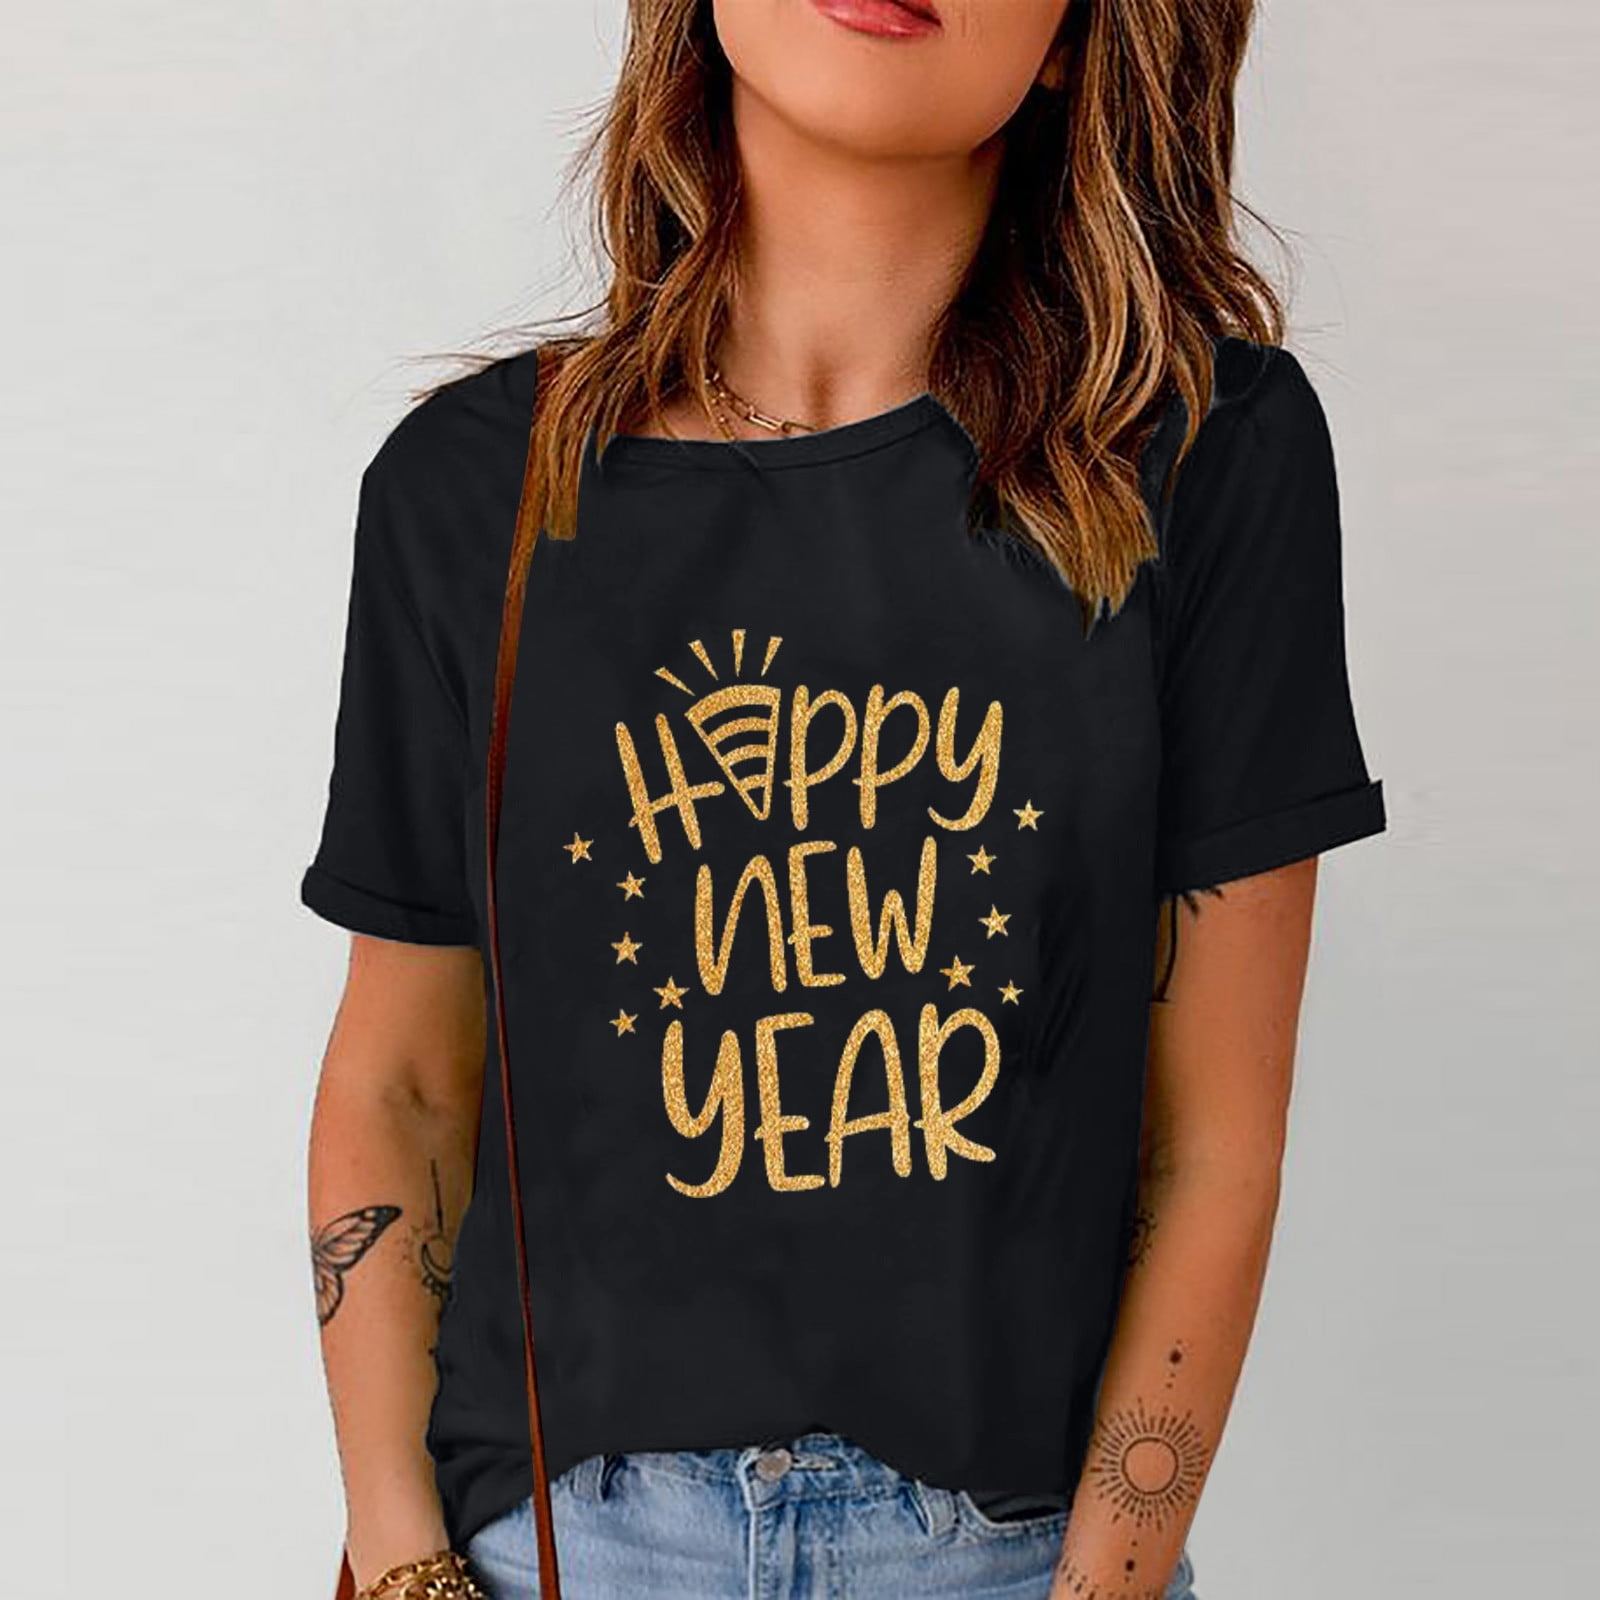 2023 Supplies Years Sleeve Happy Short Party New Shirts Round Tee T-Shirt 2023 New Neck Year Eve